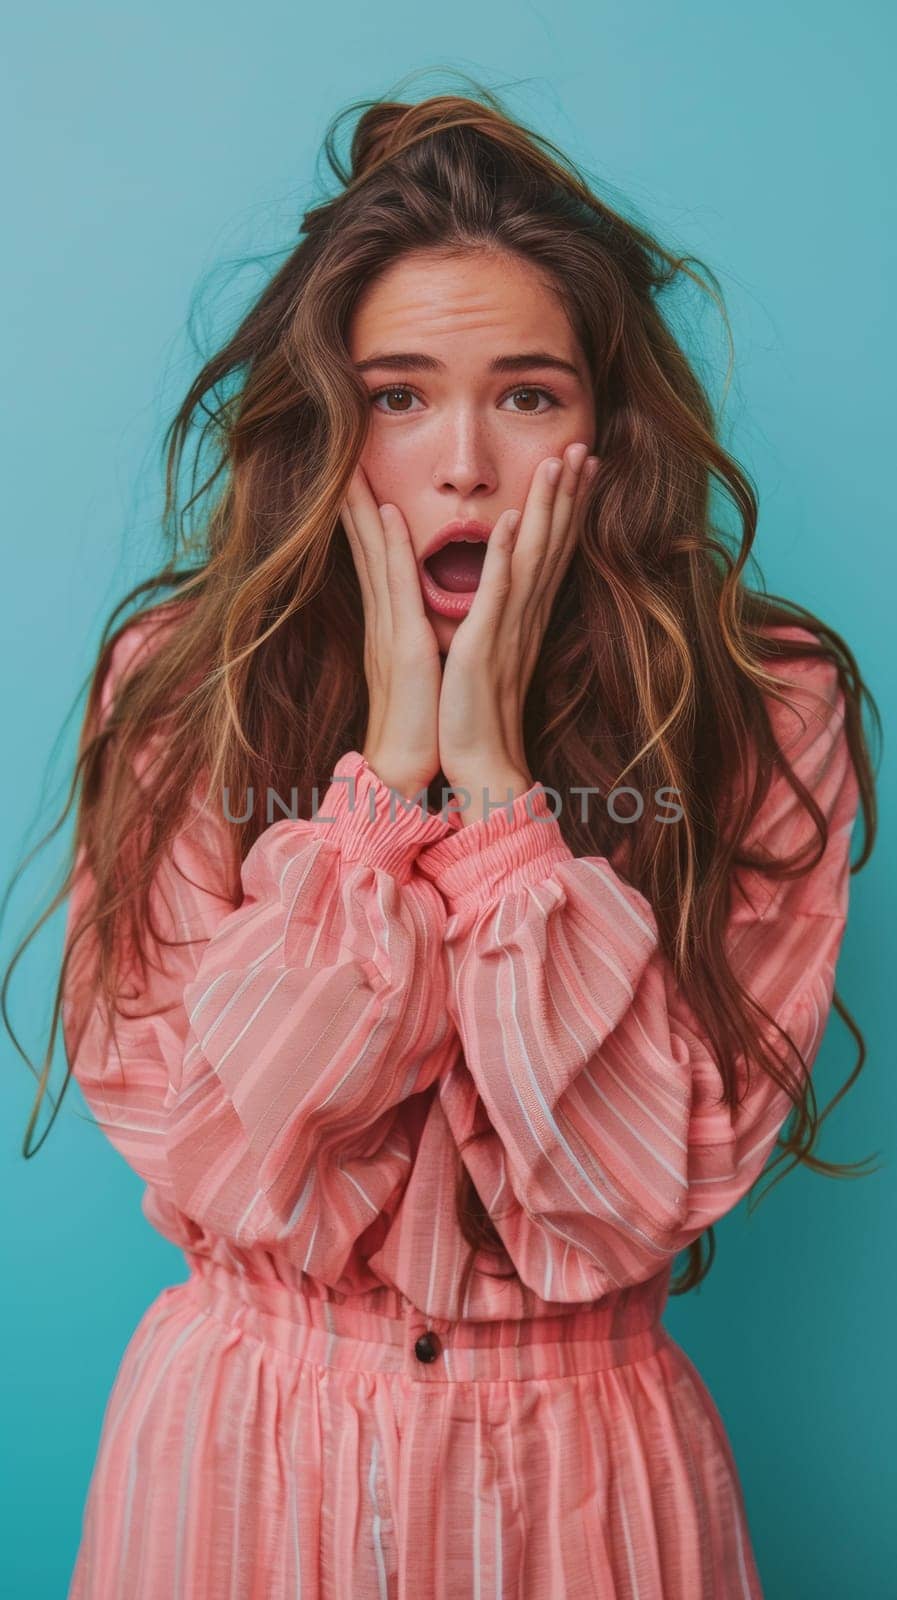 A woman in a pink dress covering her mouth with both hands, AI by starush